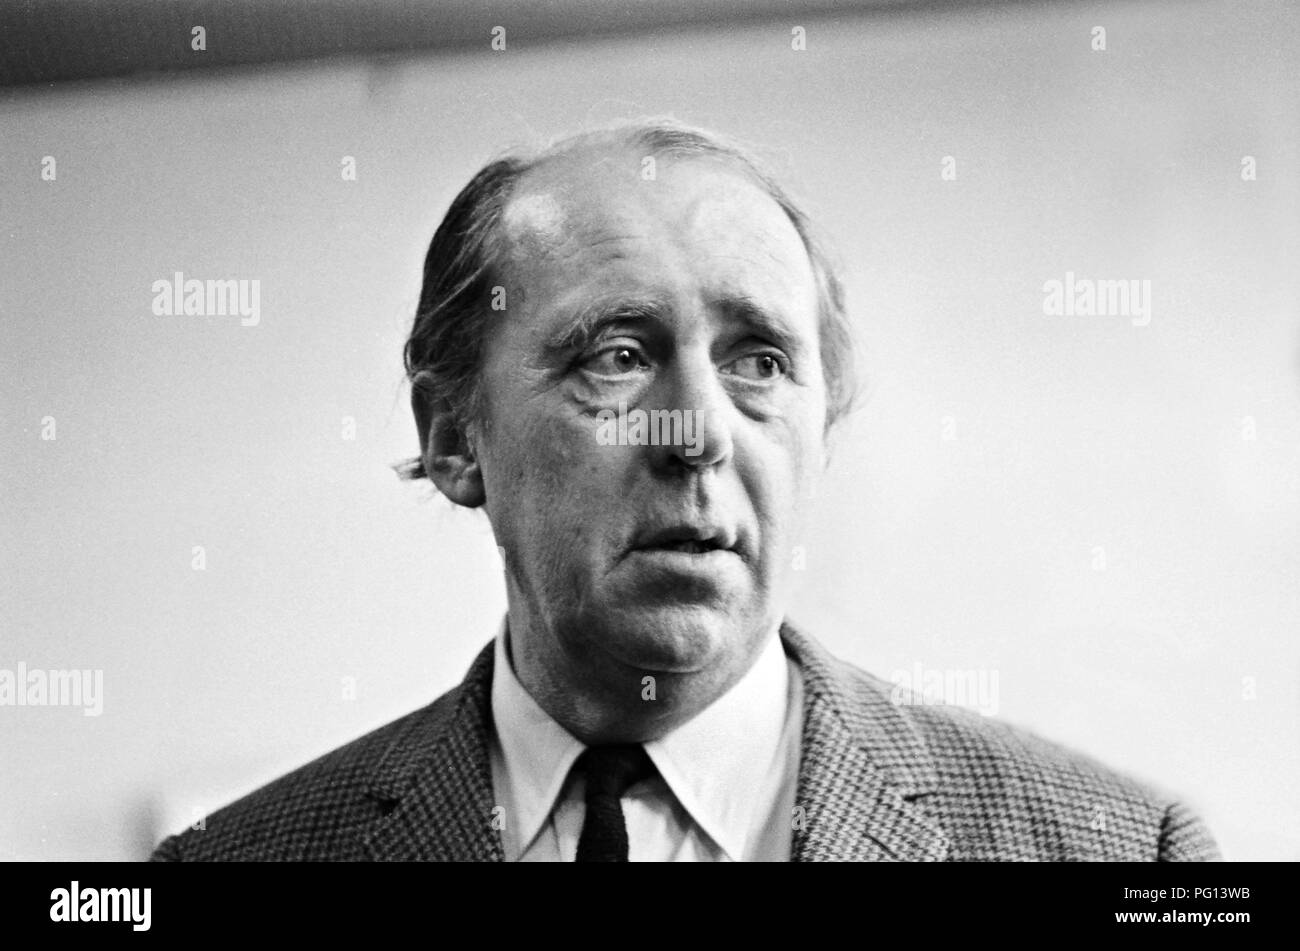 The German writer Heinrich Boell (Heinrich Boell) was established on 21 December 1917 in Cologne born and died on 16 July 1985 in Dueren-Langenbroich. In 1972 he received the Nobel Prize for Literature. Stock Photo